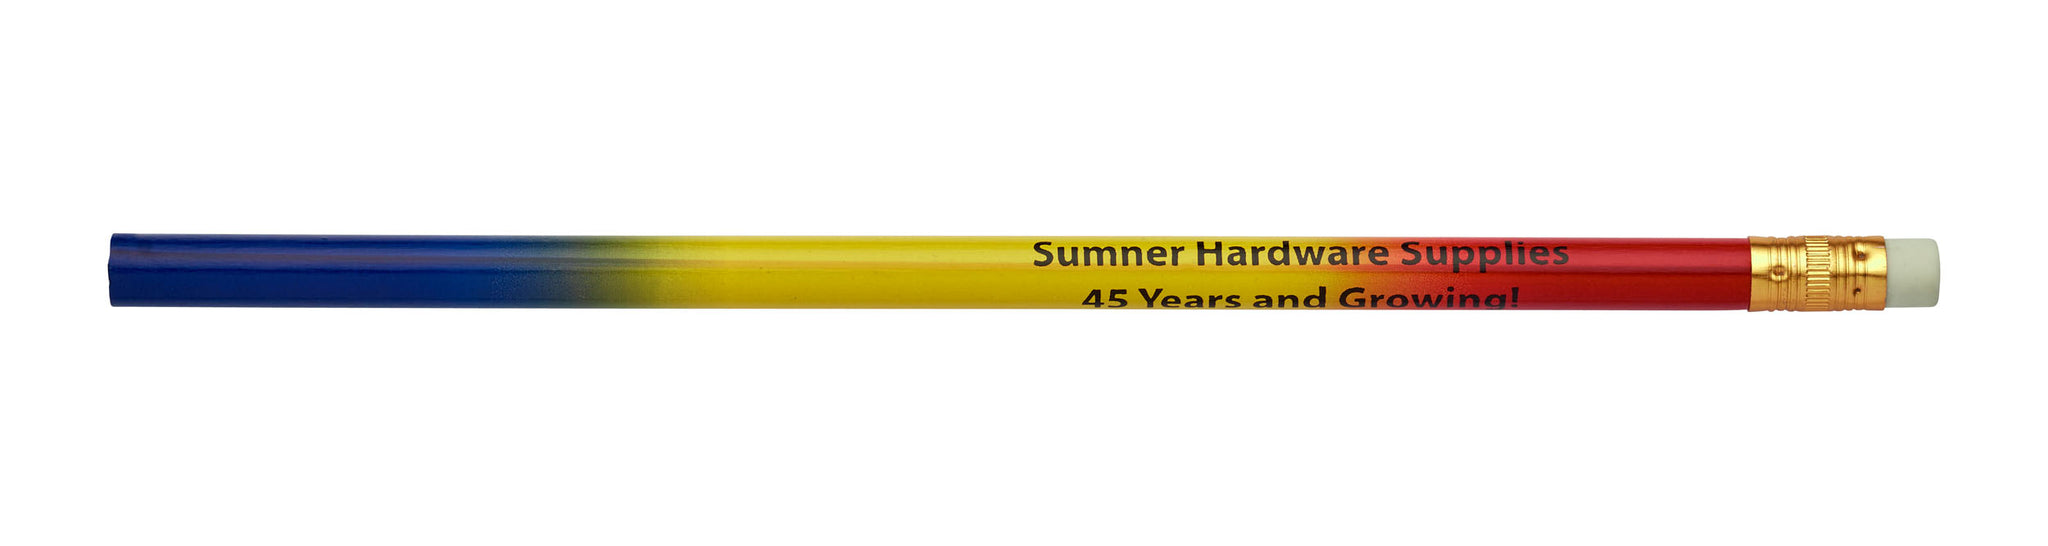 Pencil Guy Shop Promotional Personalized Imprinted Three-Colored Rainbow (Red, Yellow, Blue) Pencil - Pencil Guy Shop